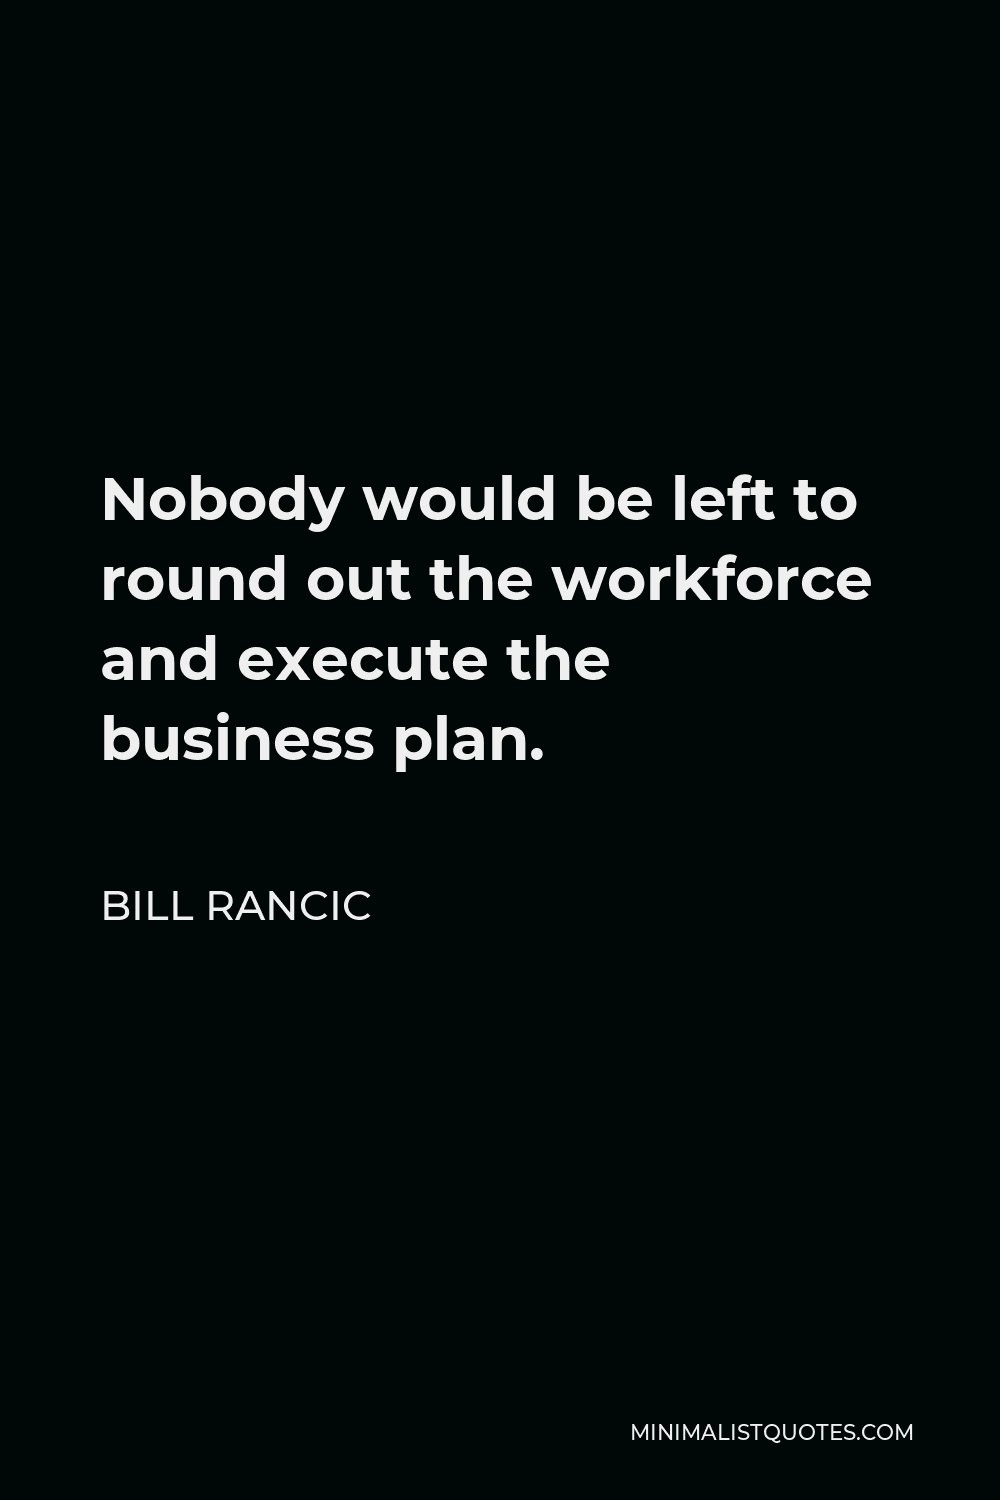 Bill Rancic Quote - Nobody would be left to round out the workforce and execute the business plan.